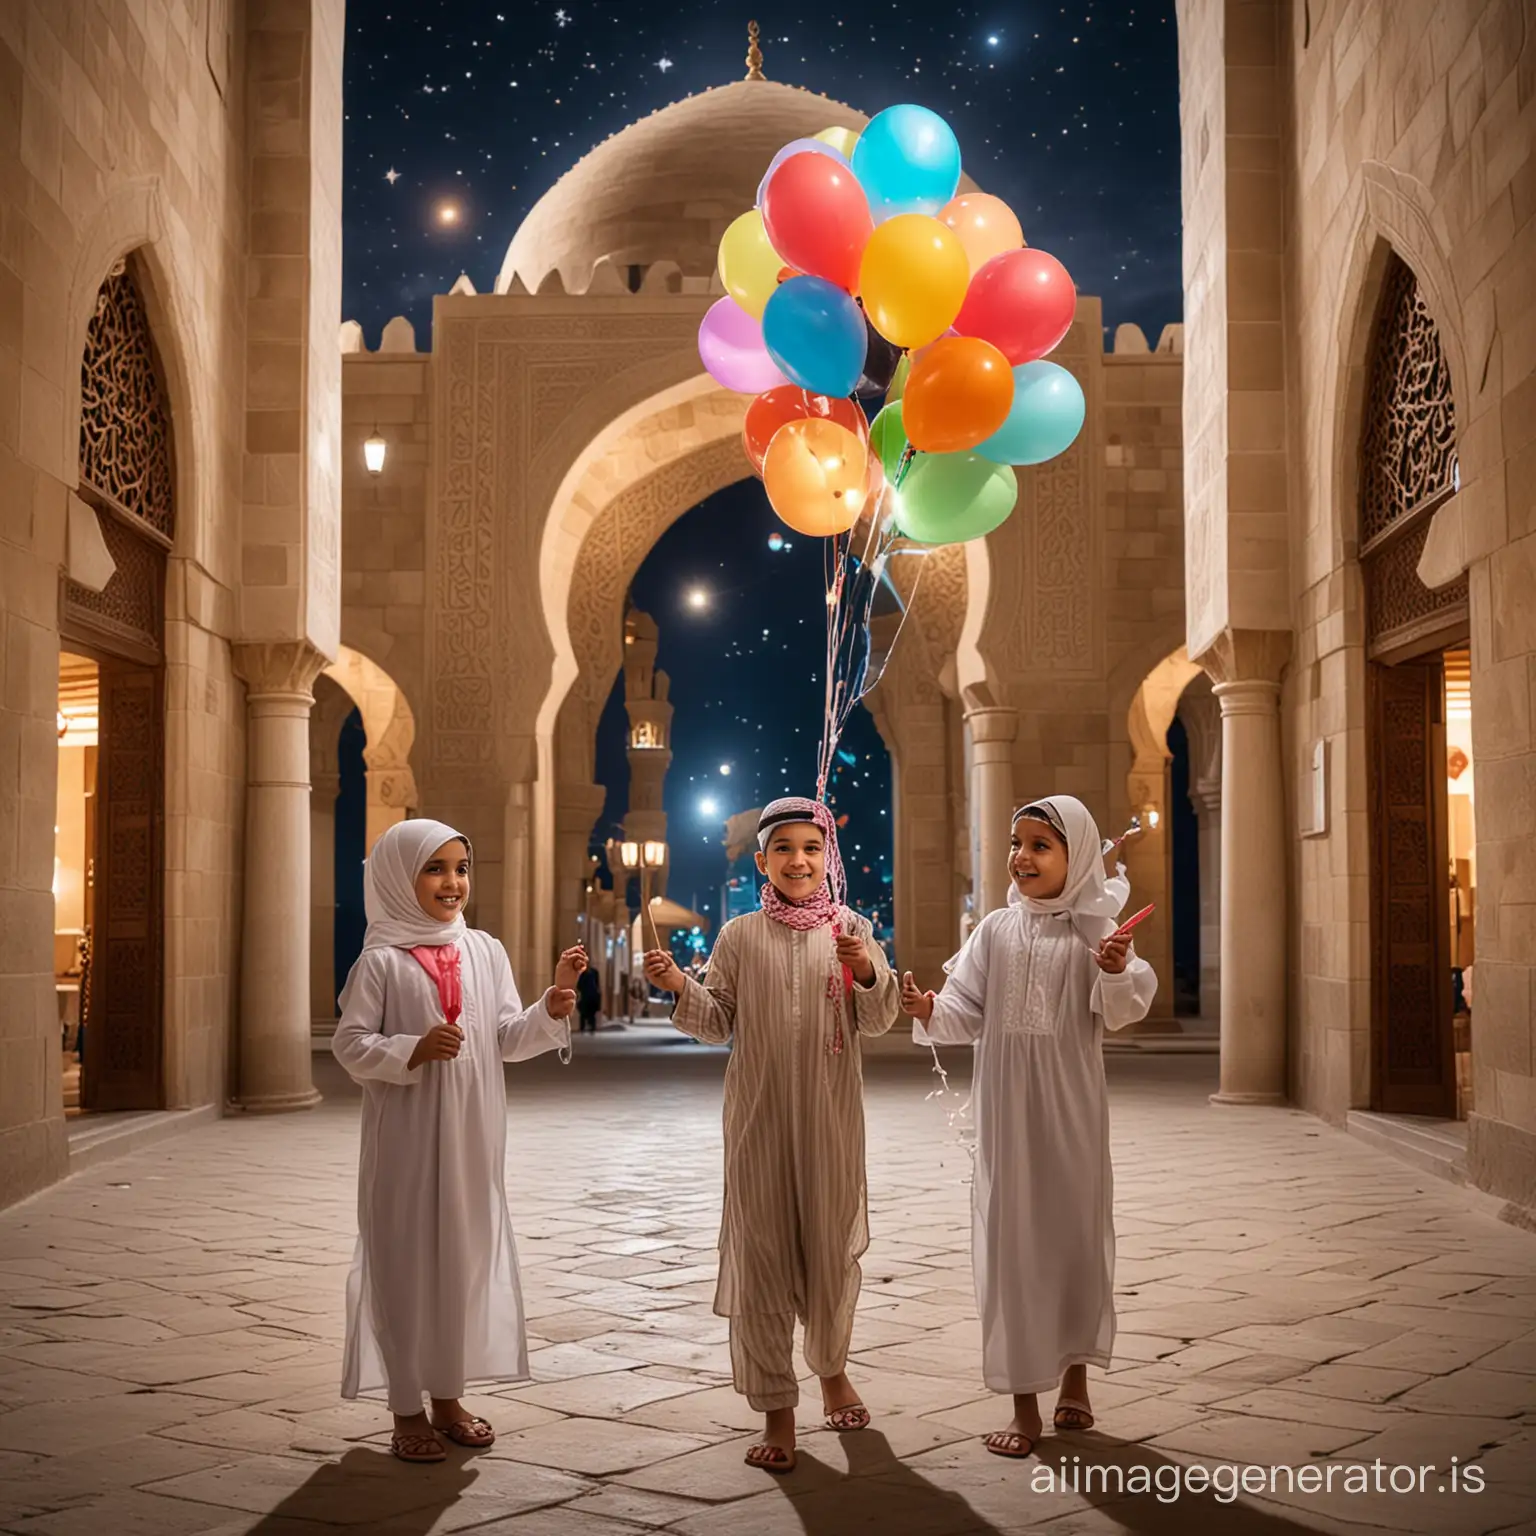 Happy Arab children holding balloons and candy for Islamic events like Eid ul Fitr in a mosque courtyard at night